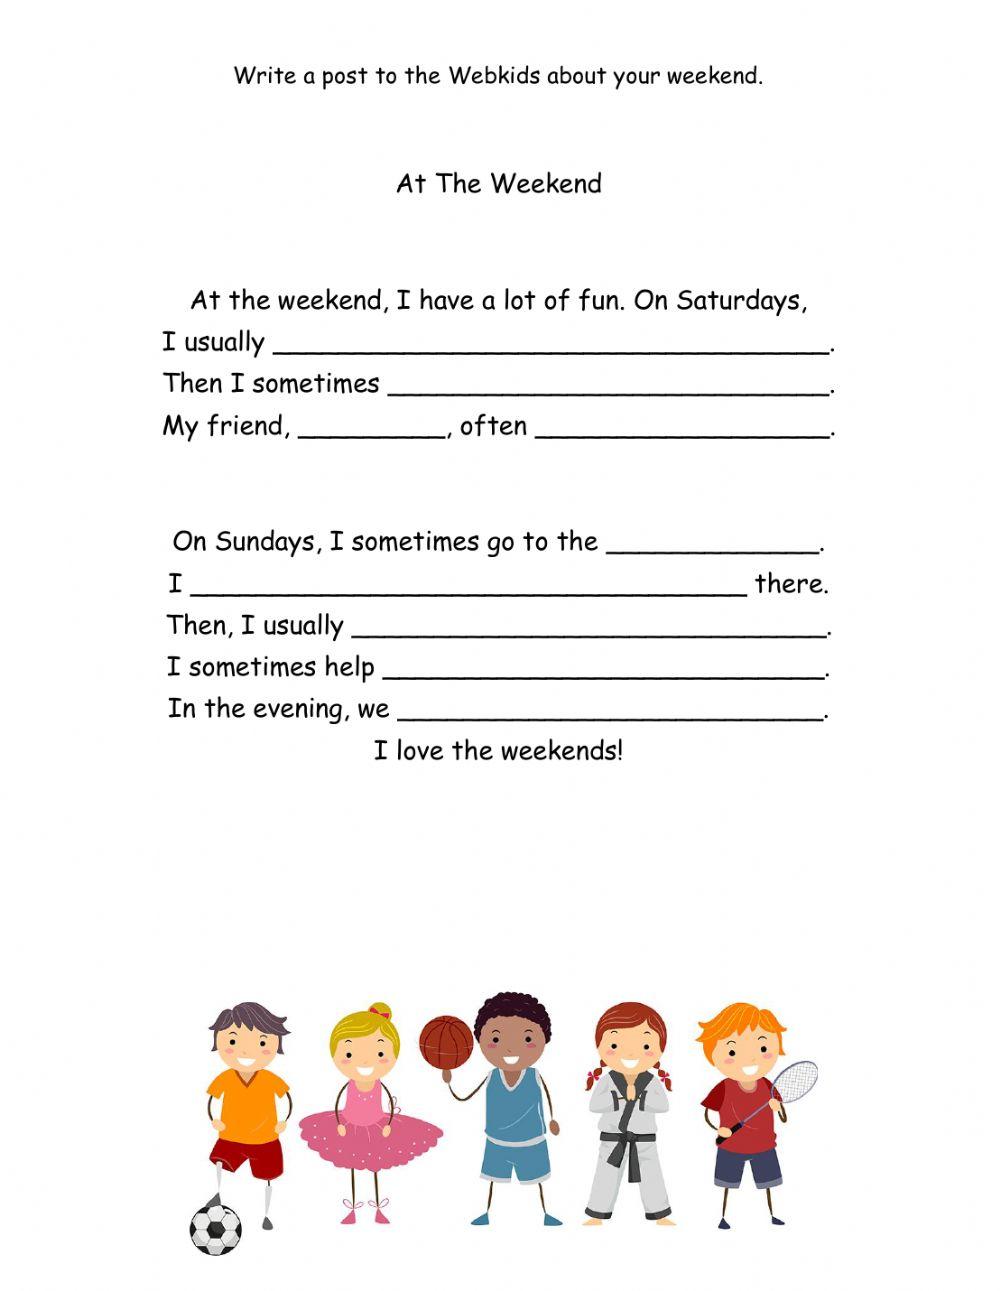 Writing: Post about My Weekends